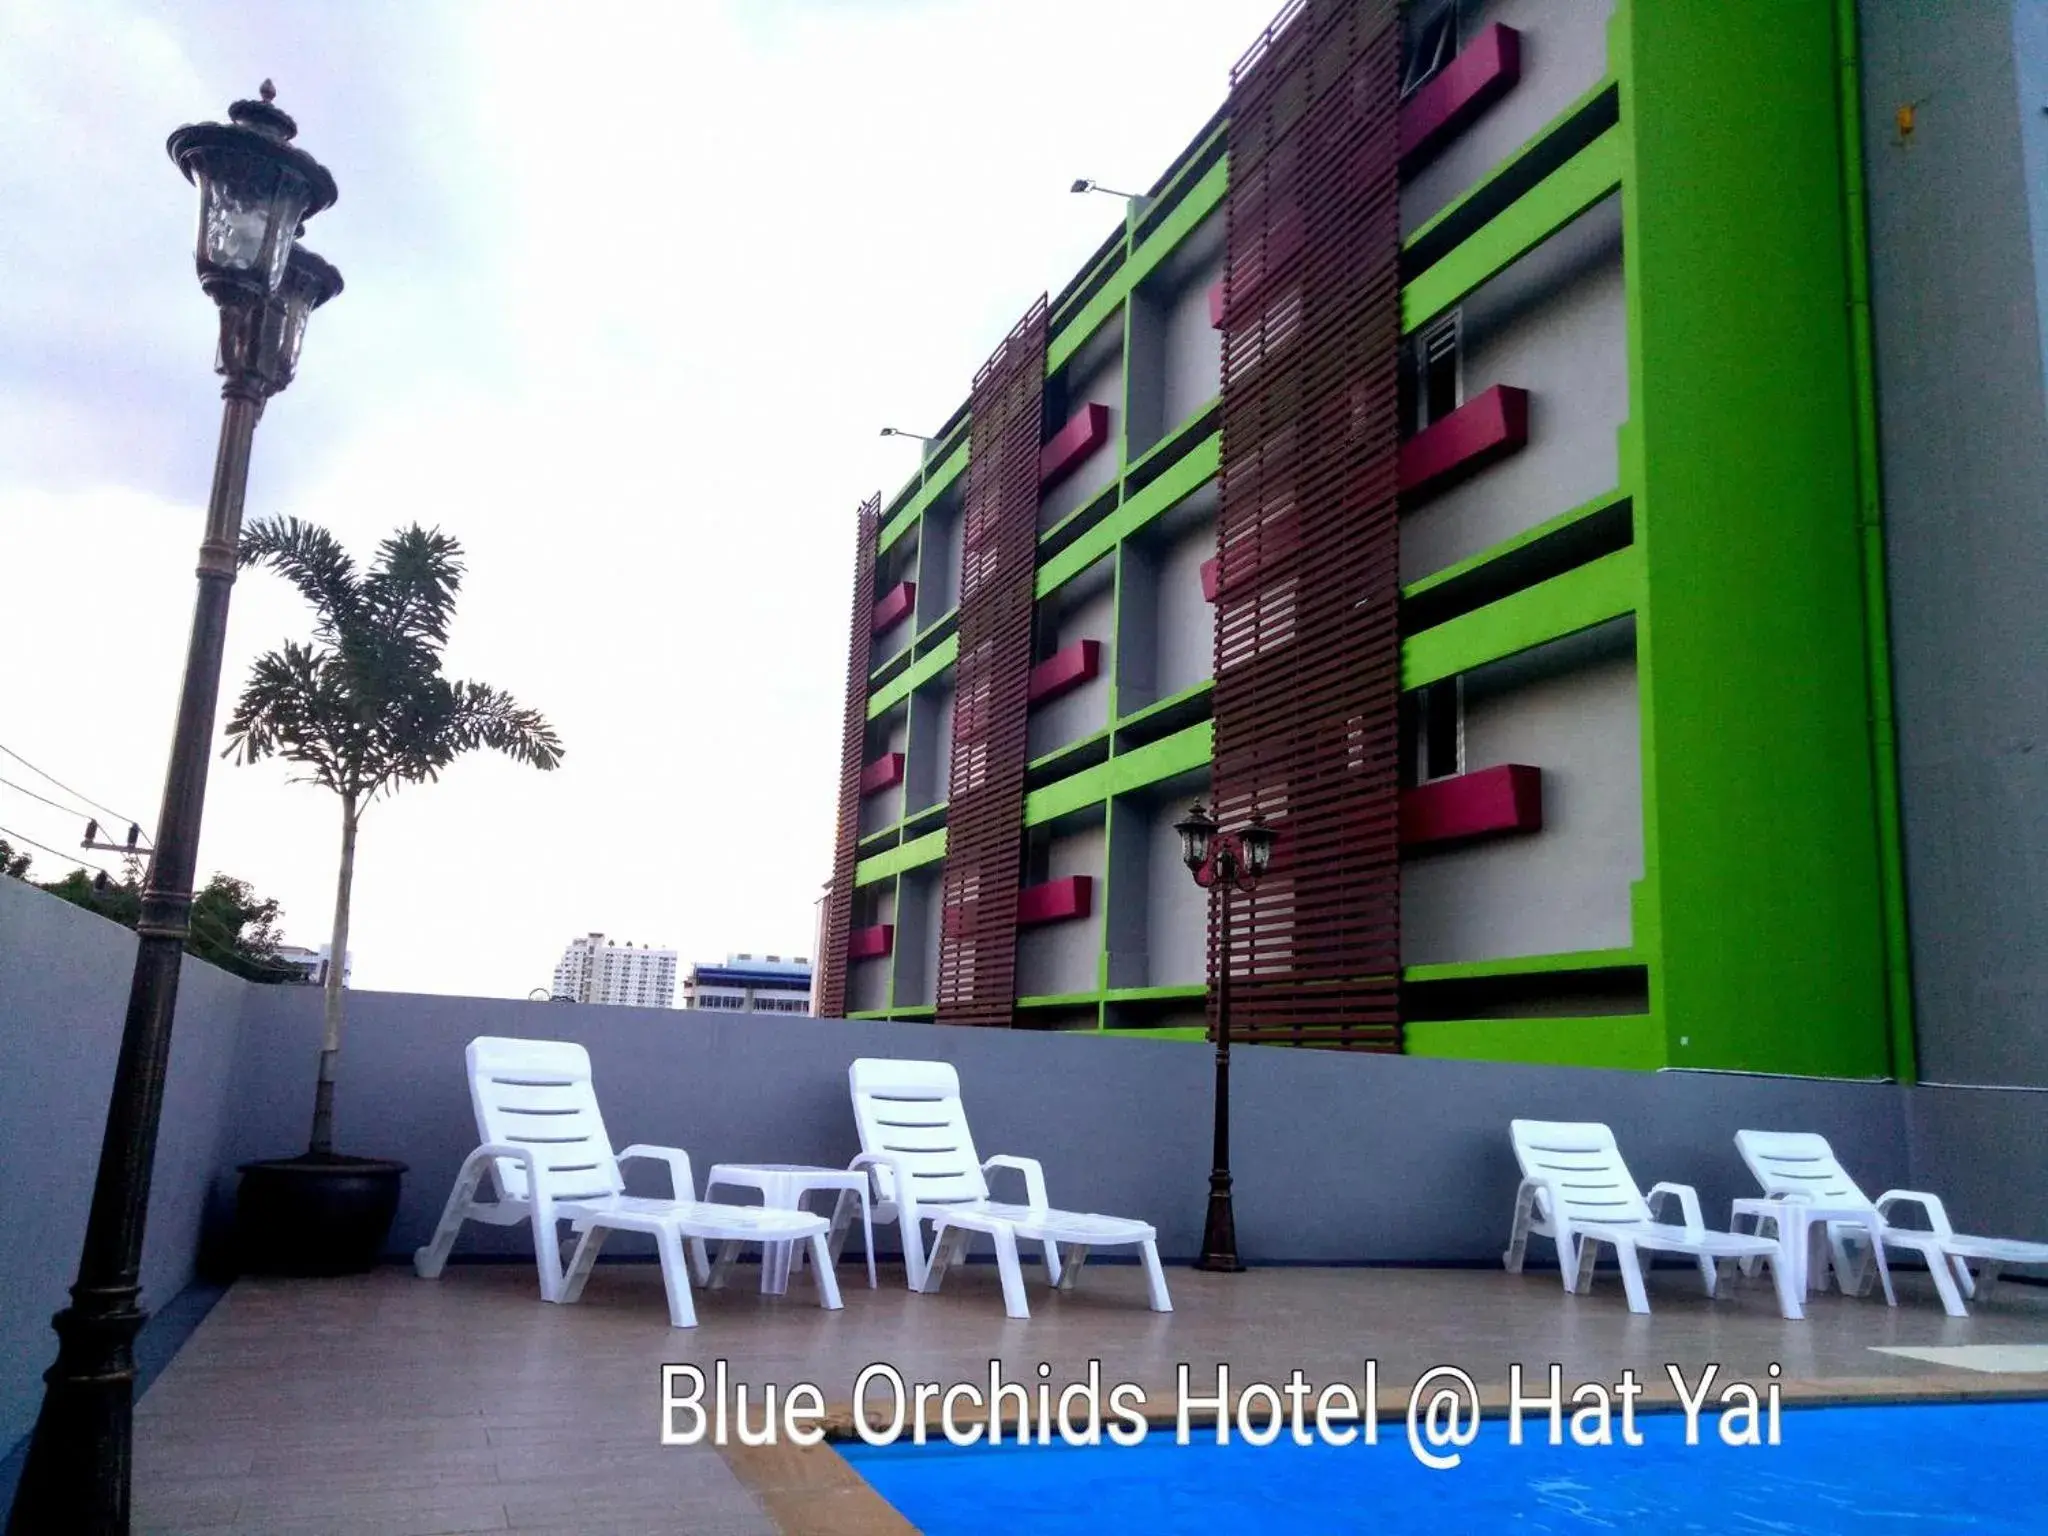 Property Building in Blue Orchids Hotel